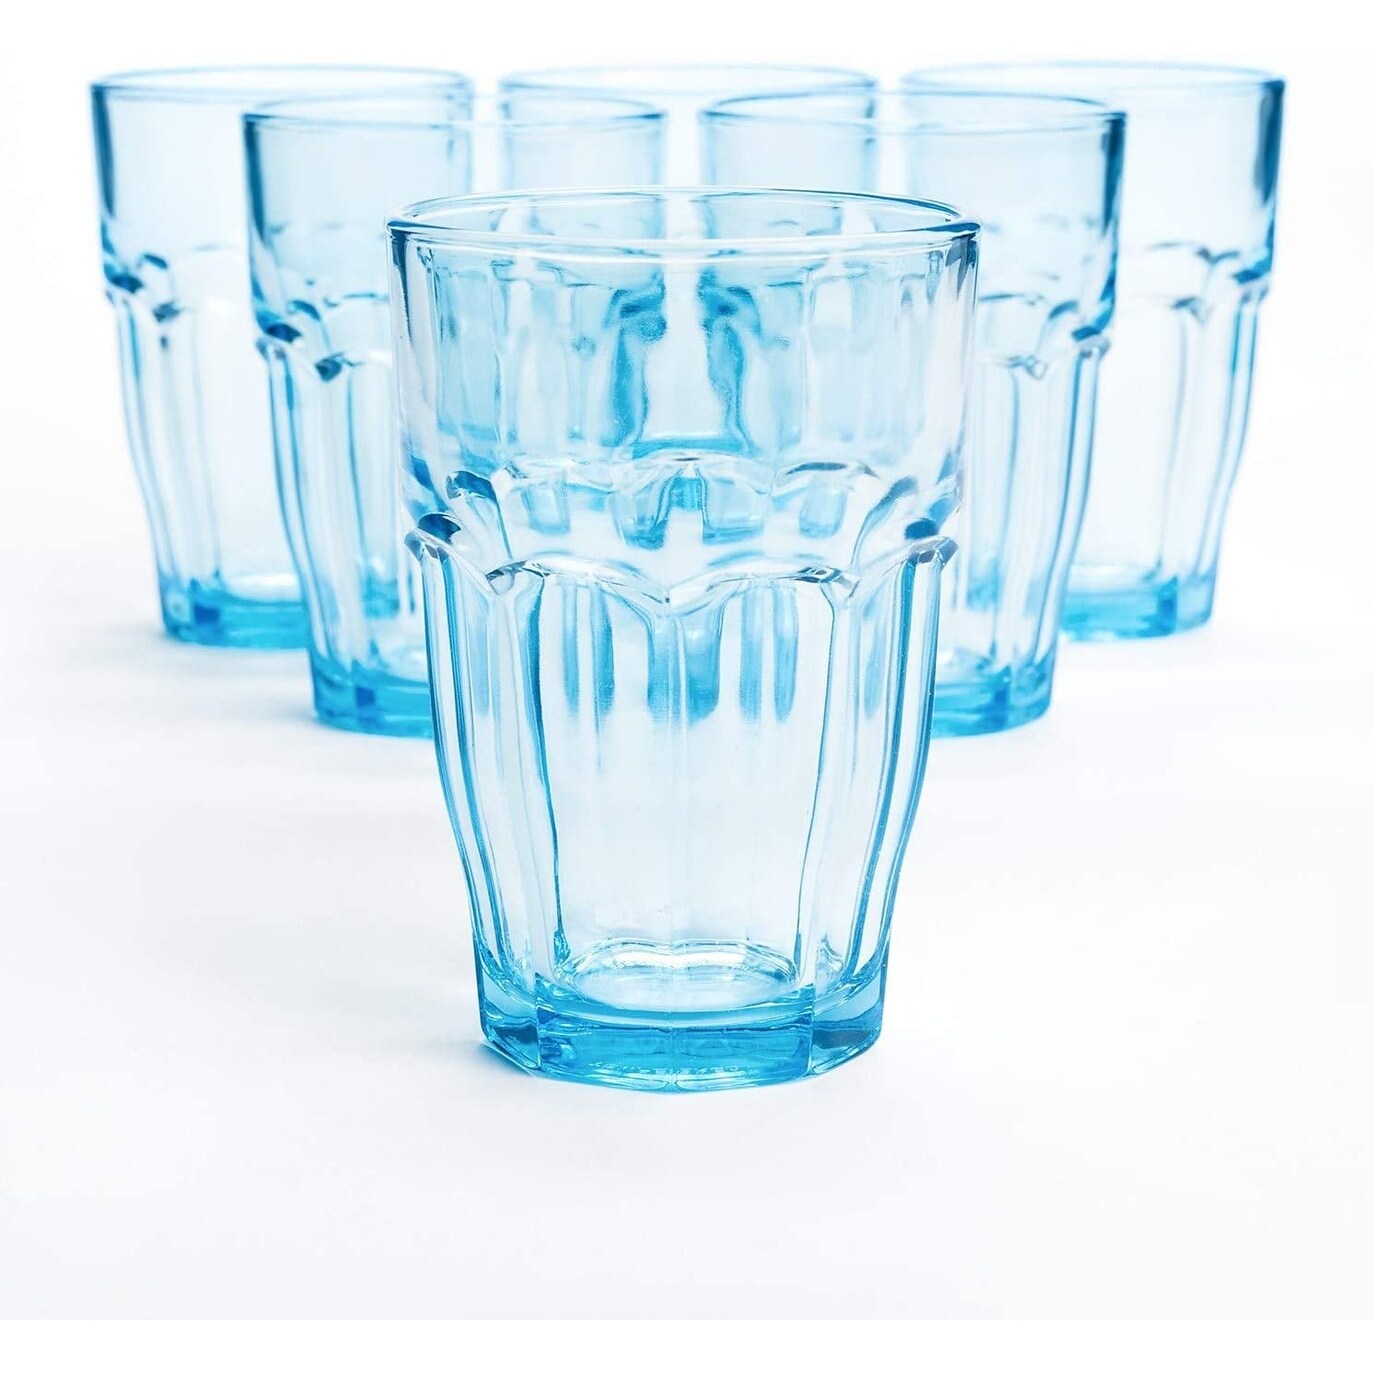 https://ak1.ostkcdn.com/images/products/is/images/direct/13d135717174b104ee999c9ee2a337e3b726f624/Bormioli-Rocco-Rock-Bar-Lounge-Beverage-Glasses-Set-of-6.jpg